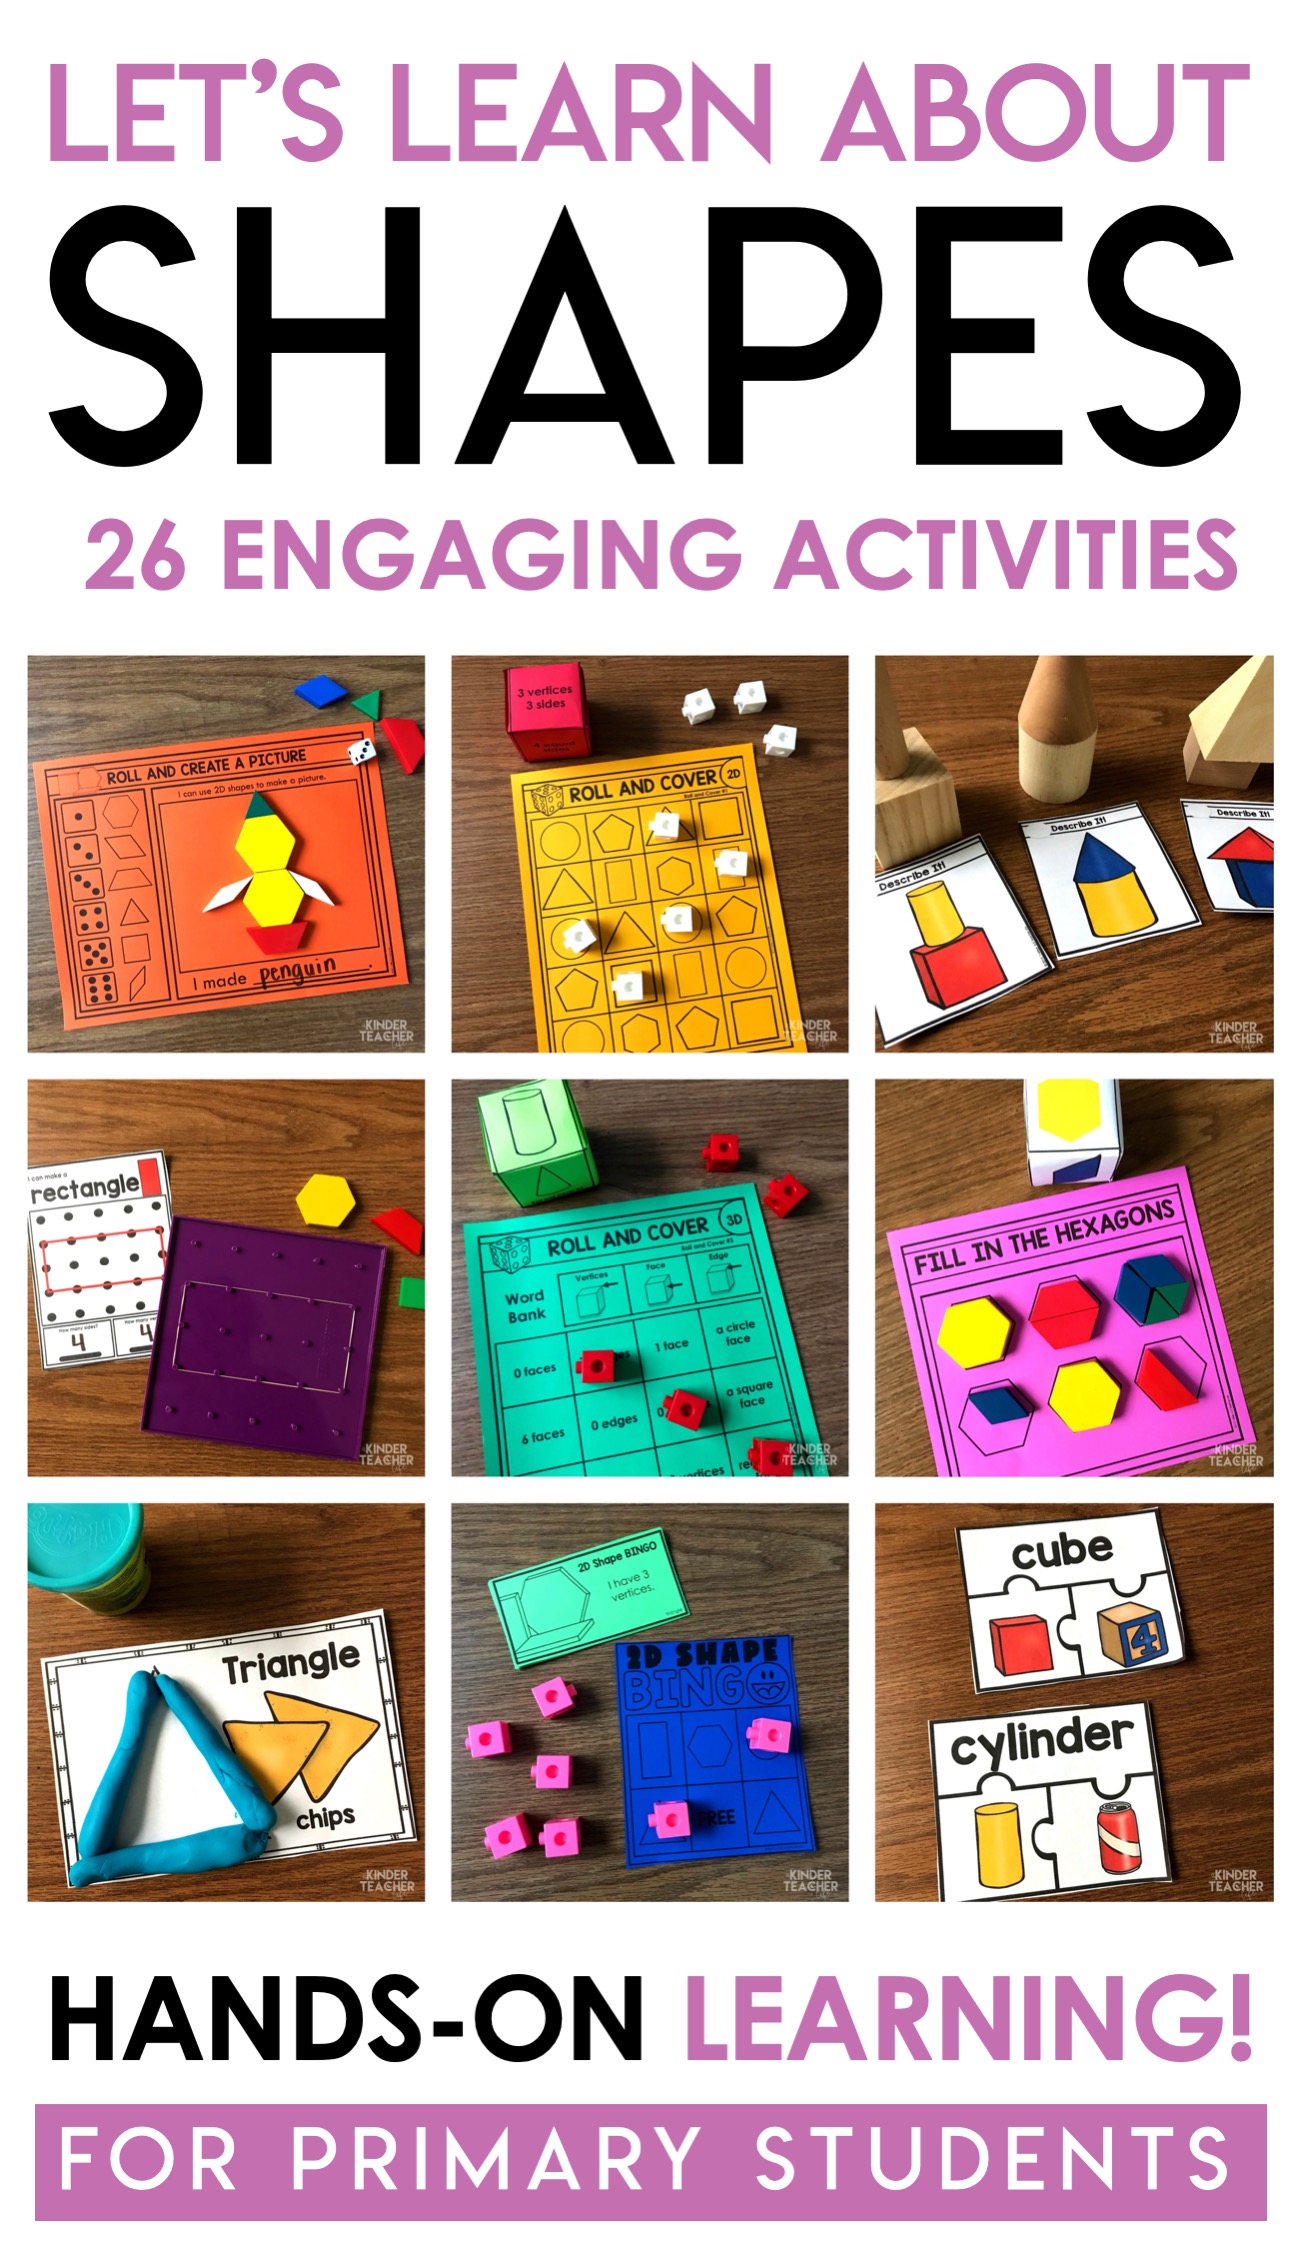 Looking for new ideas to teach 2D and 3D shapes using hands-on activities? Here are 26 engaging activities that you can use in your classroom to teach the attributes of 2D and 3D shapes!